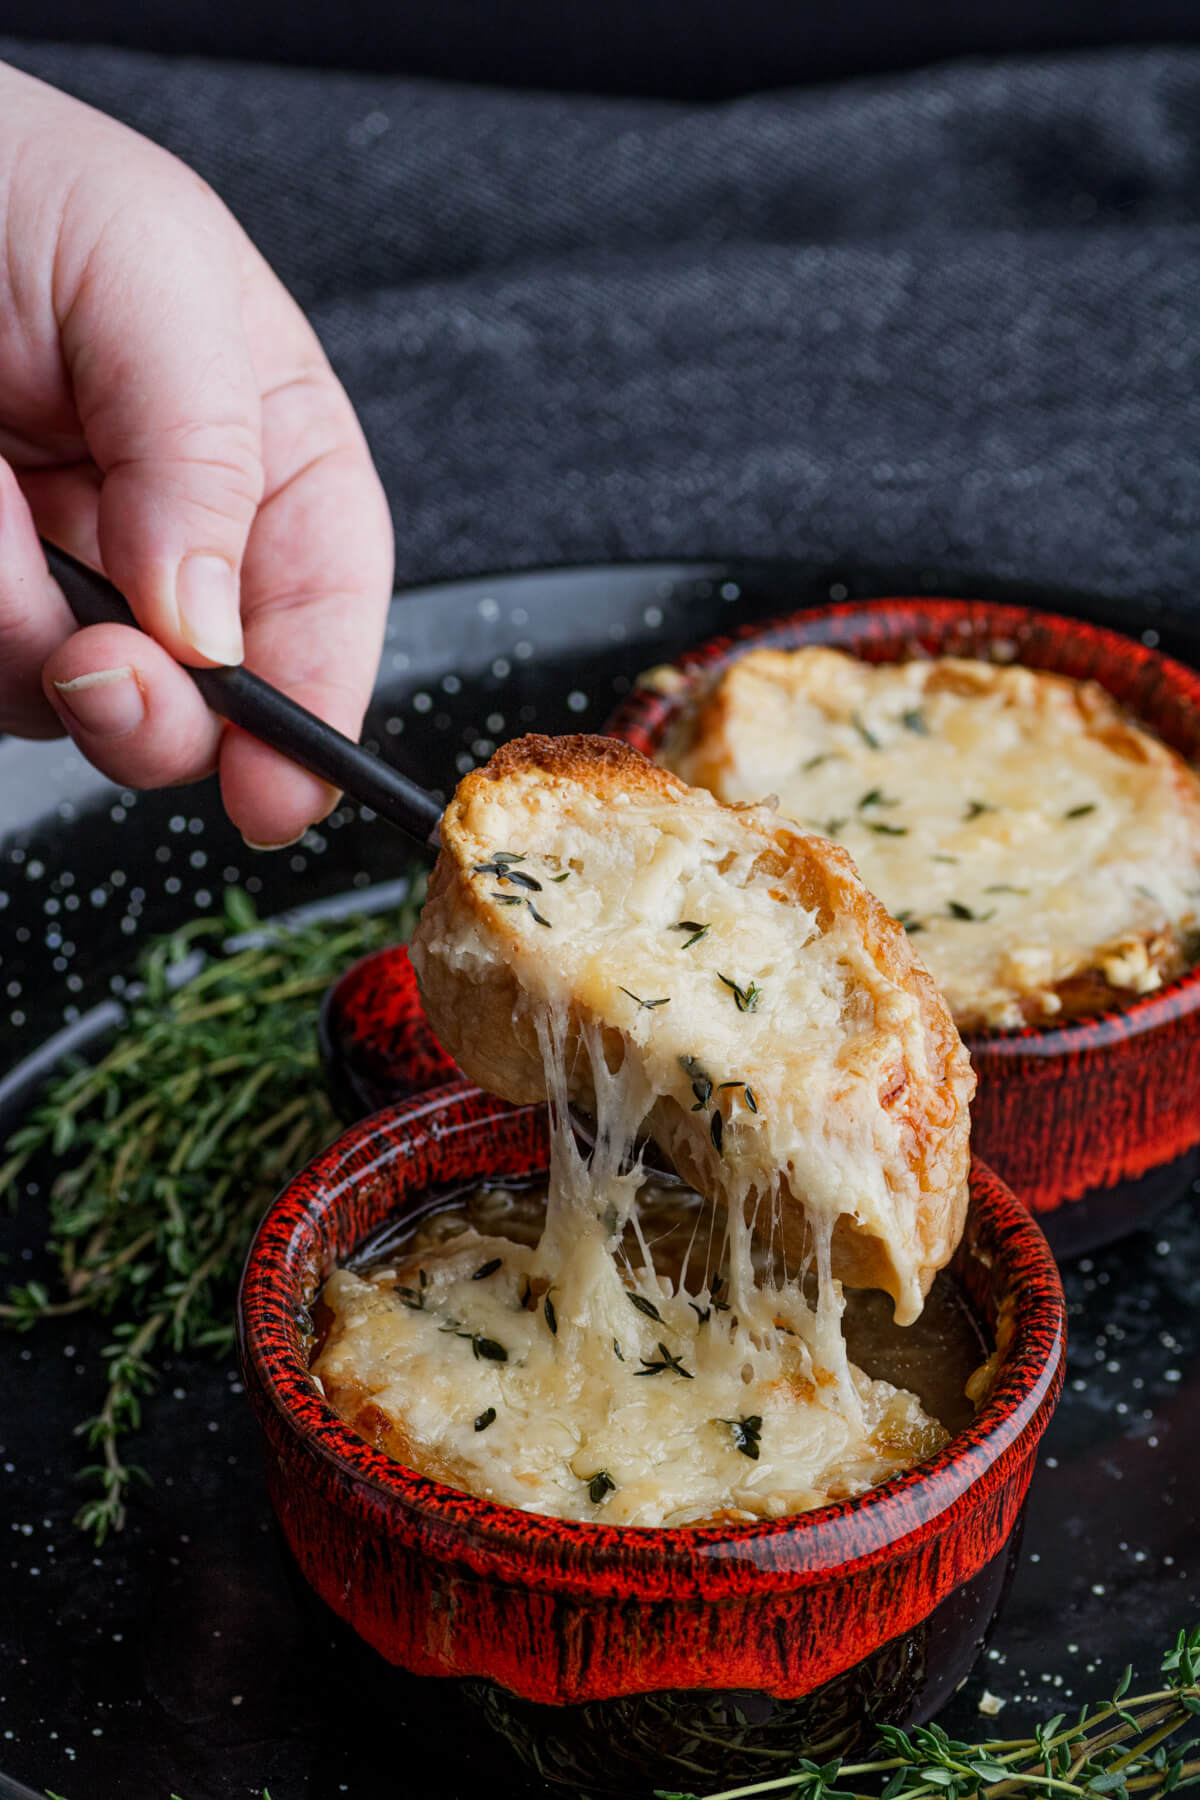 A cheese covered baguette slice being lifted out of a bowl of French Onion Soup.